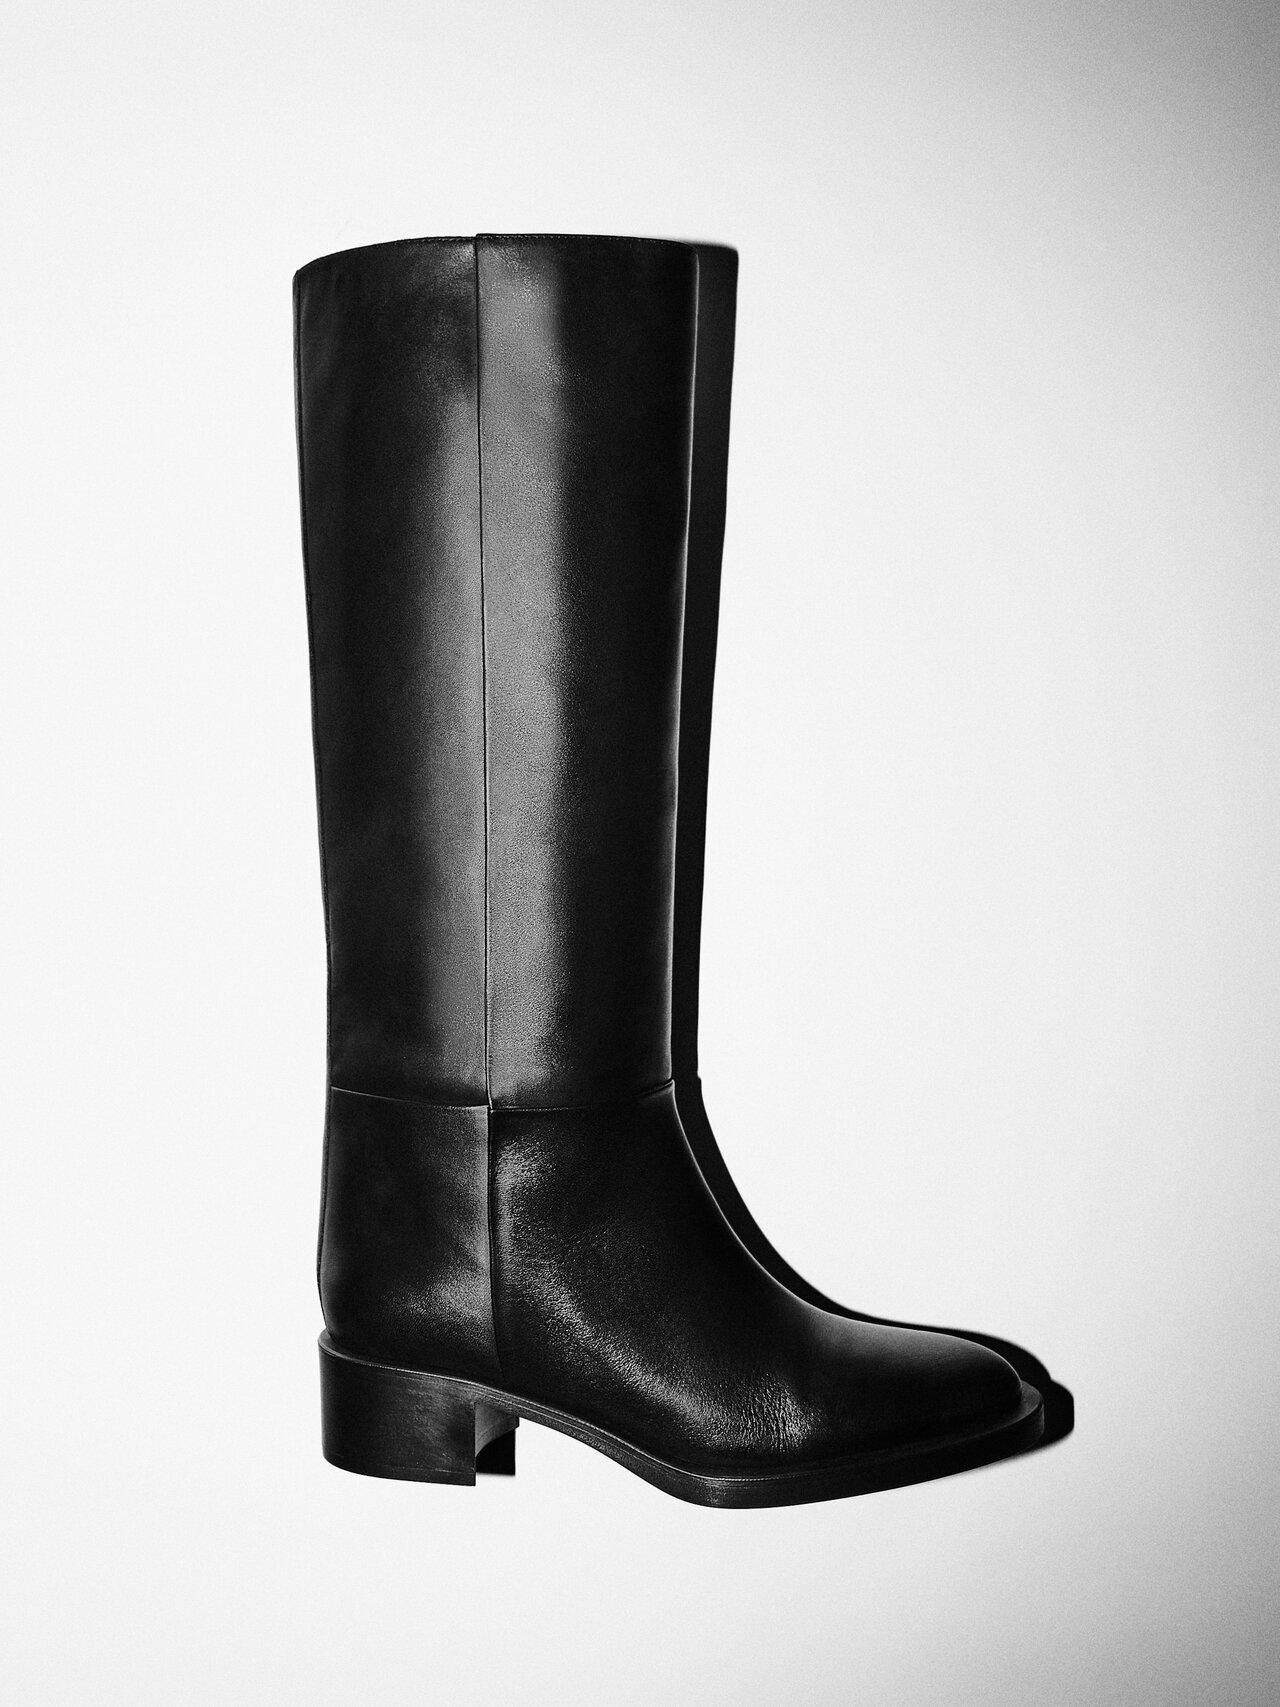 MASSIMO DUTTI Flat Leather Boots in Black | Lyst